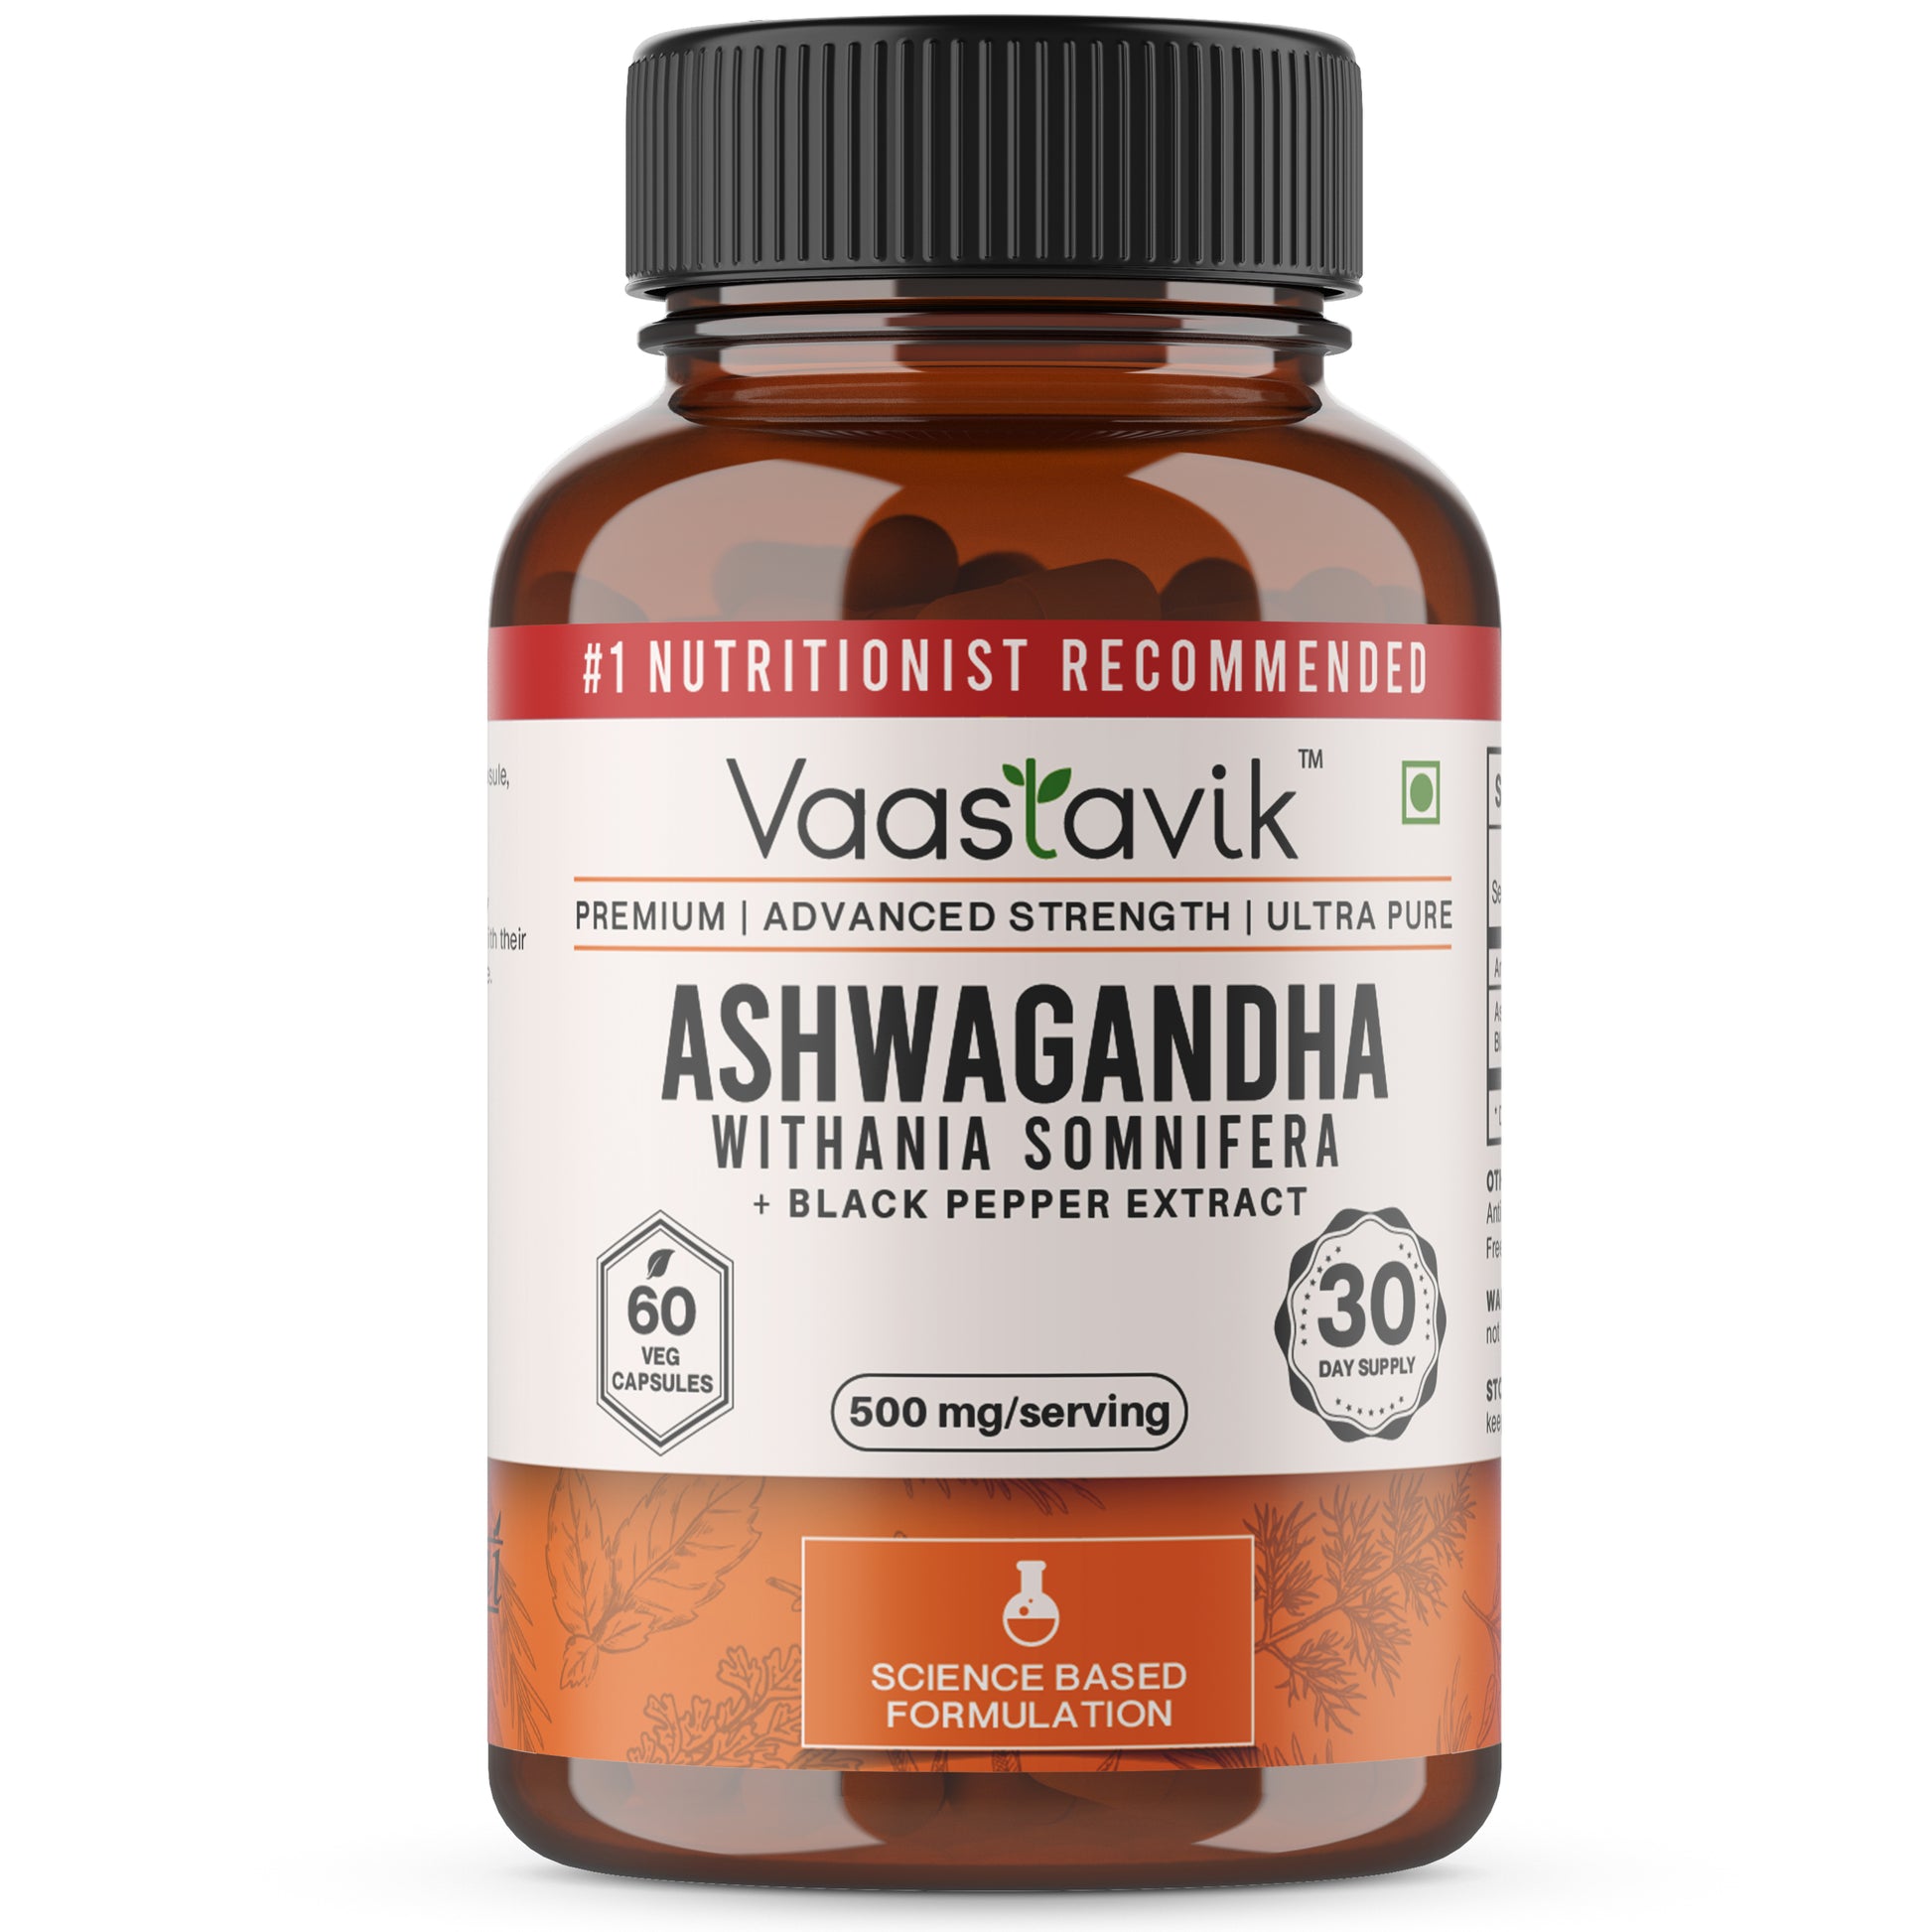 Pure  Best  Organic  Natural Buy now Shop sale Online Price bulk Manufacturer  Wholesaler  reviews ratings specifications Free Shipping Cash on delivery India supplement tablets pills capsules Extract  Ashwagandha